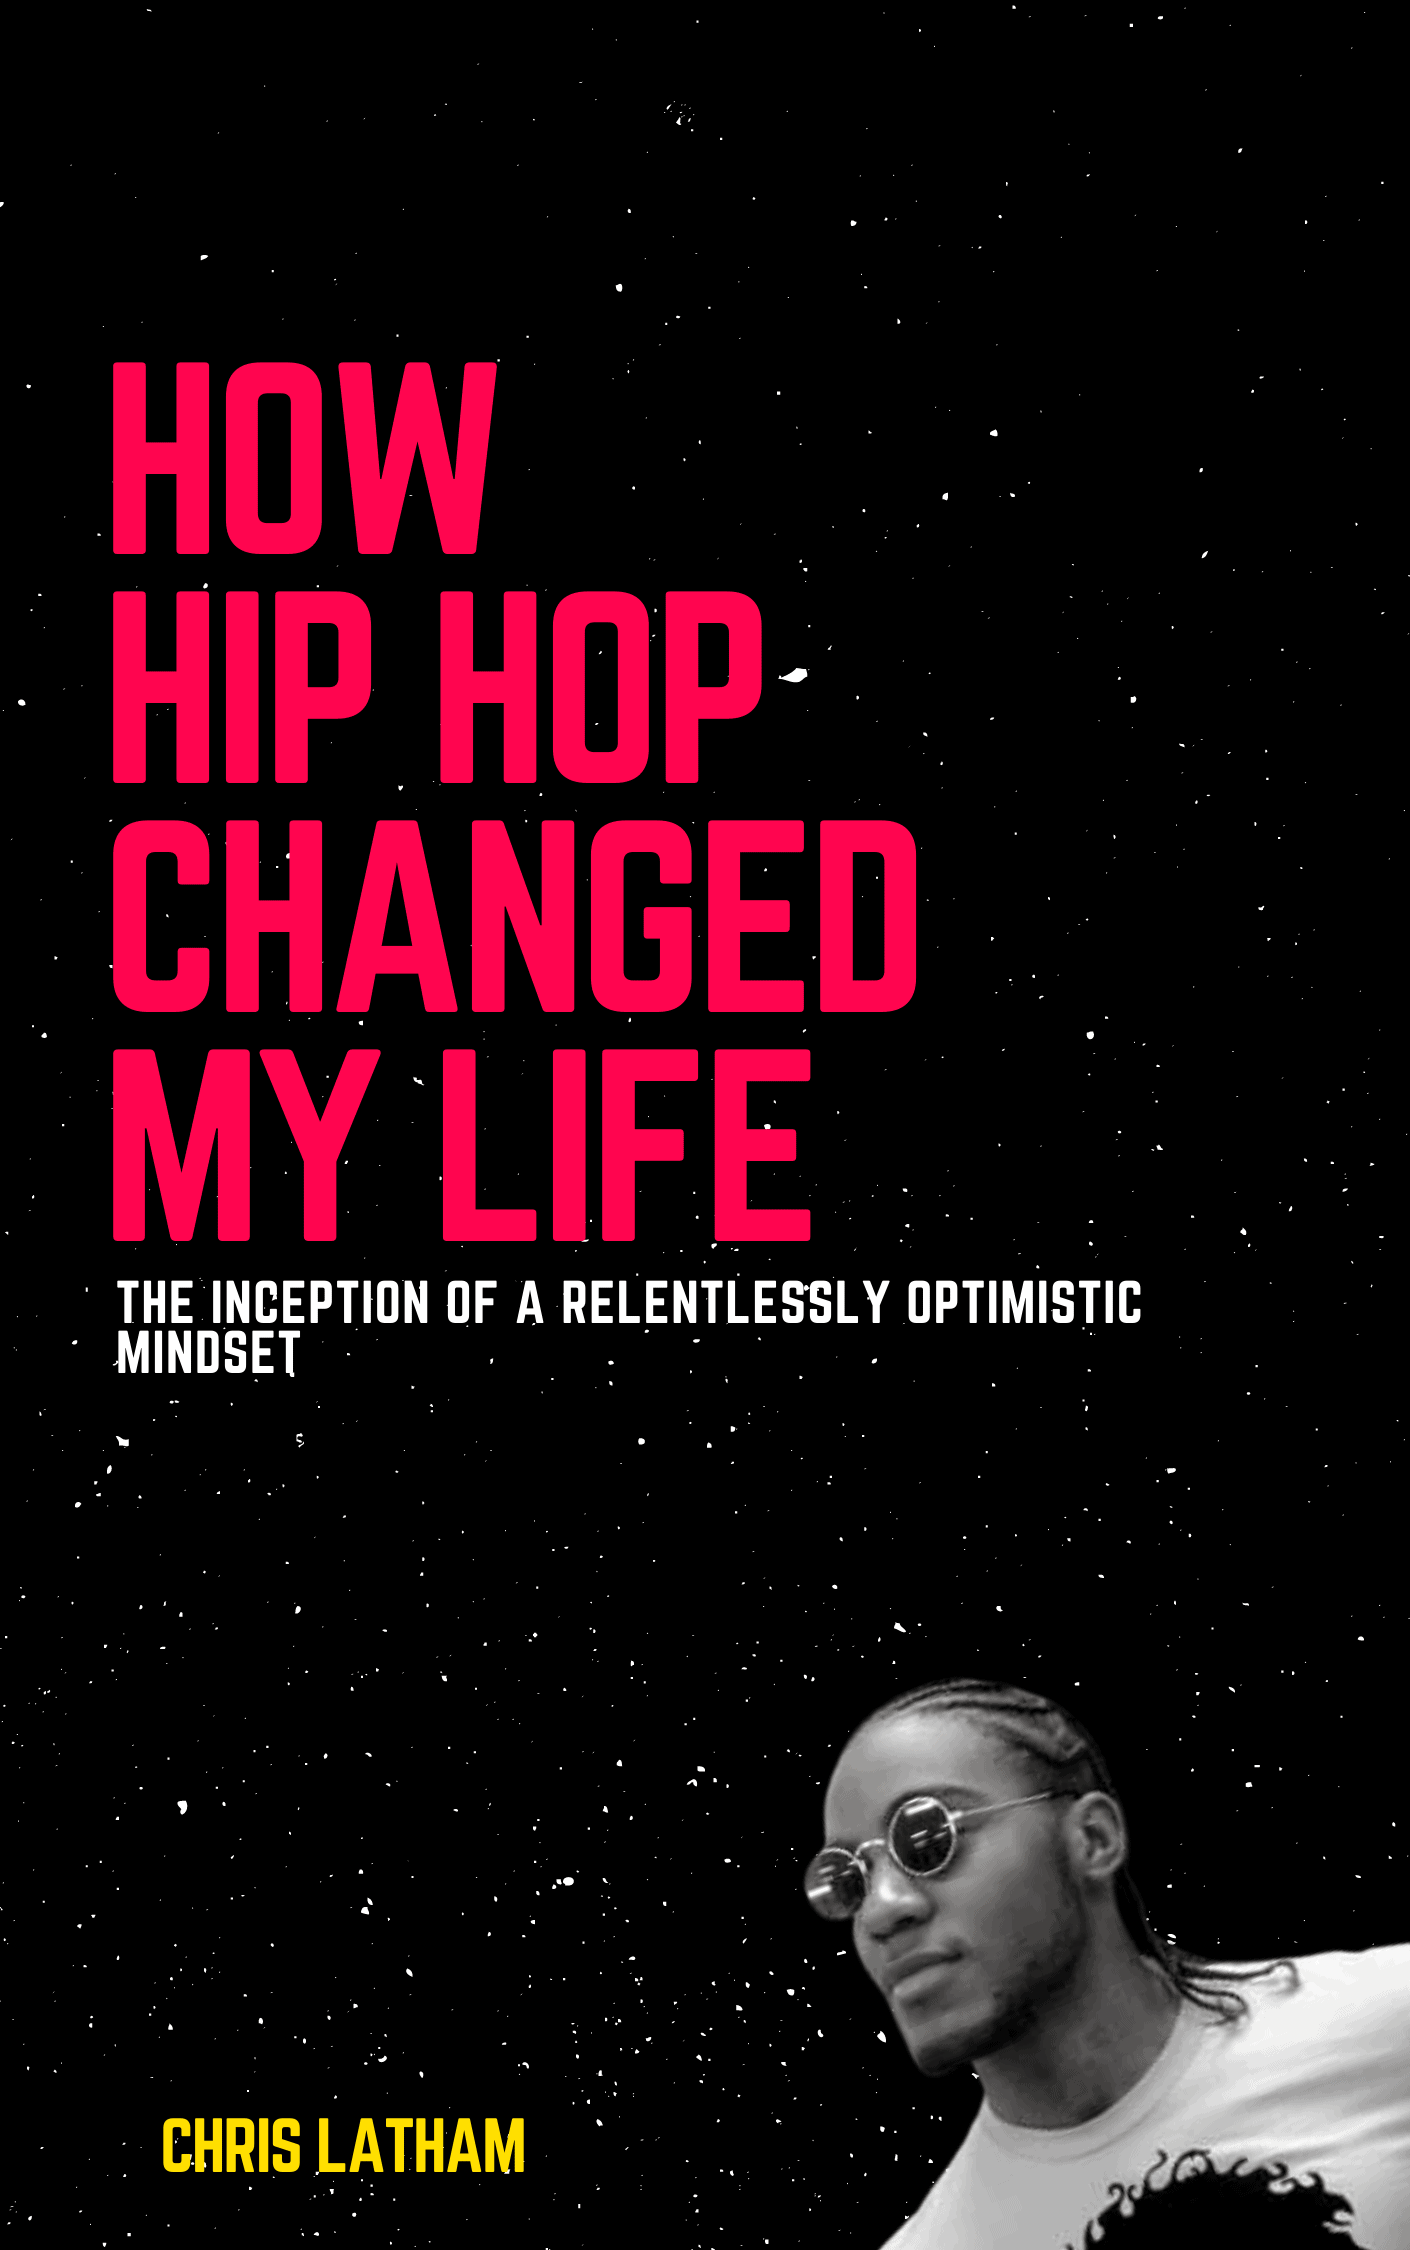 Hip Hop Changed My Life book cover 2